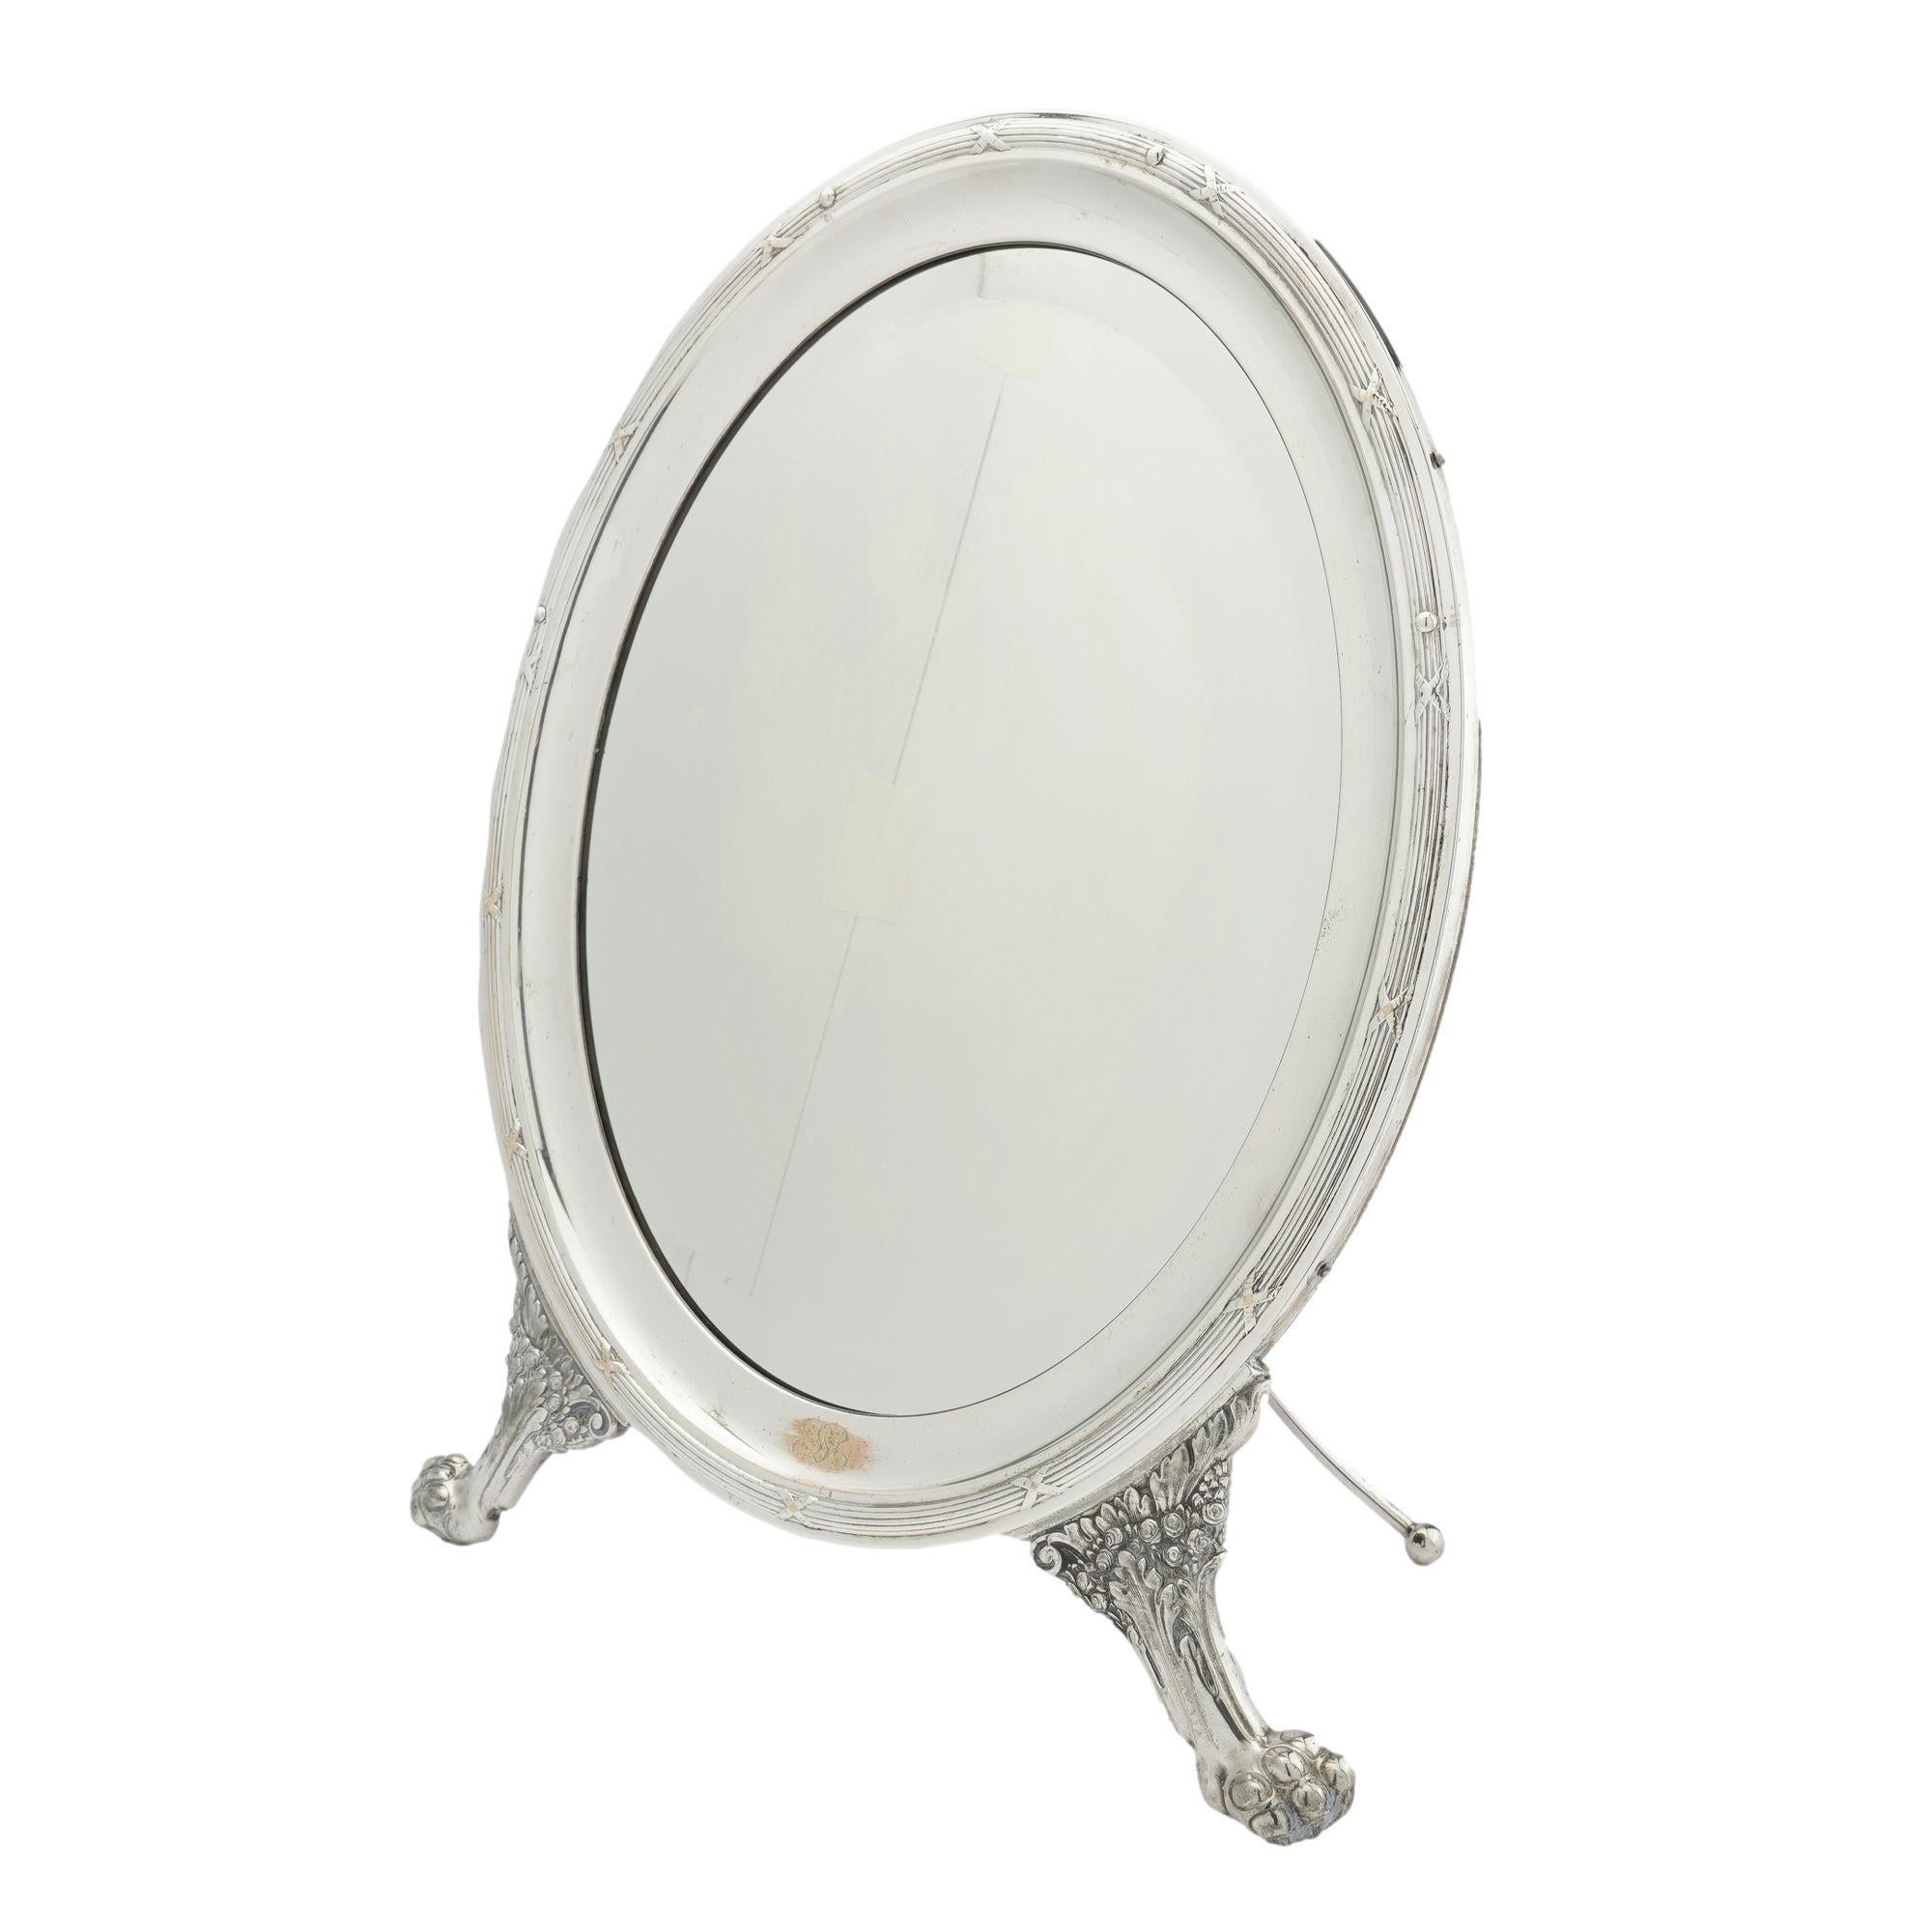 A generously sized oval shaped dressing mirror in silvered brass with an easel back and lion's paw feet. The mirrored glass has a beveled edge and the back is a single board mahogany panel fitted with a hinged silver plated easel stand. The bottom